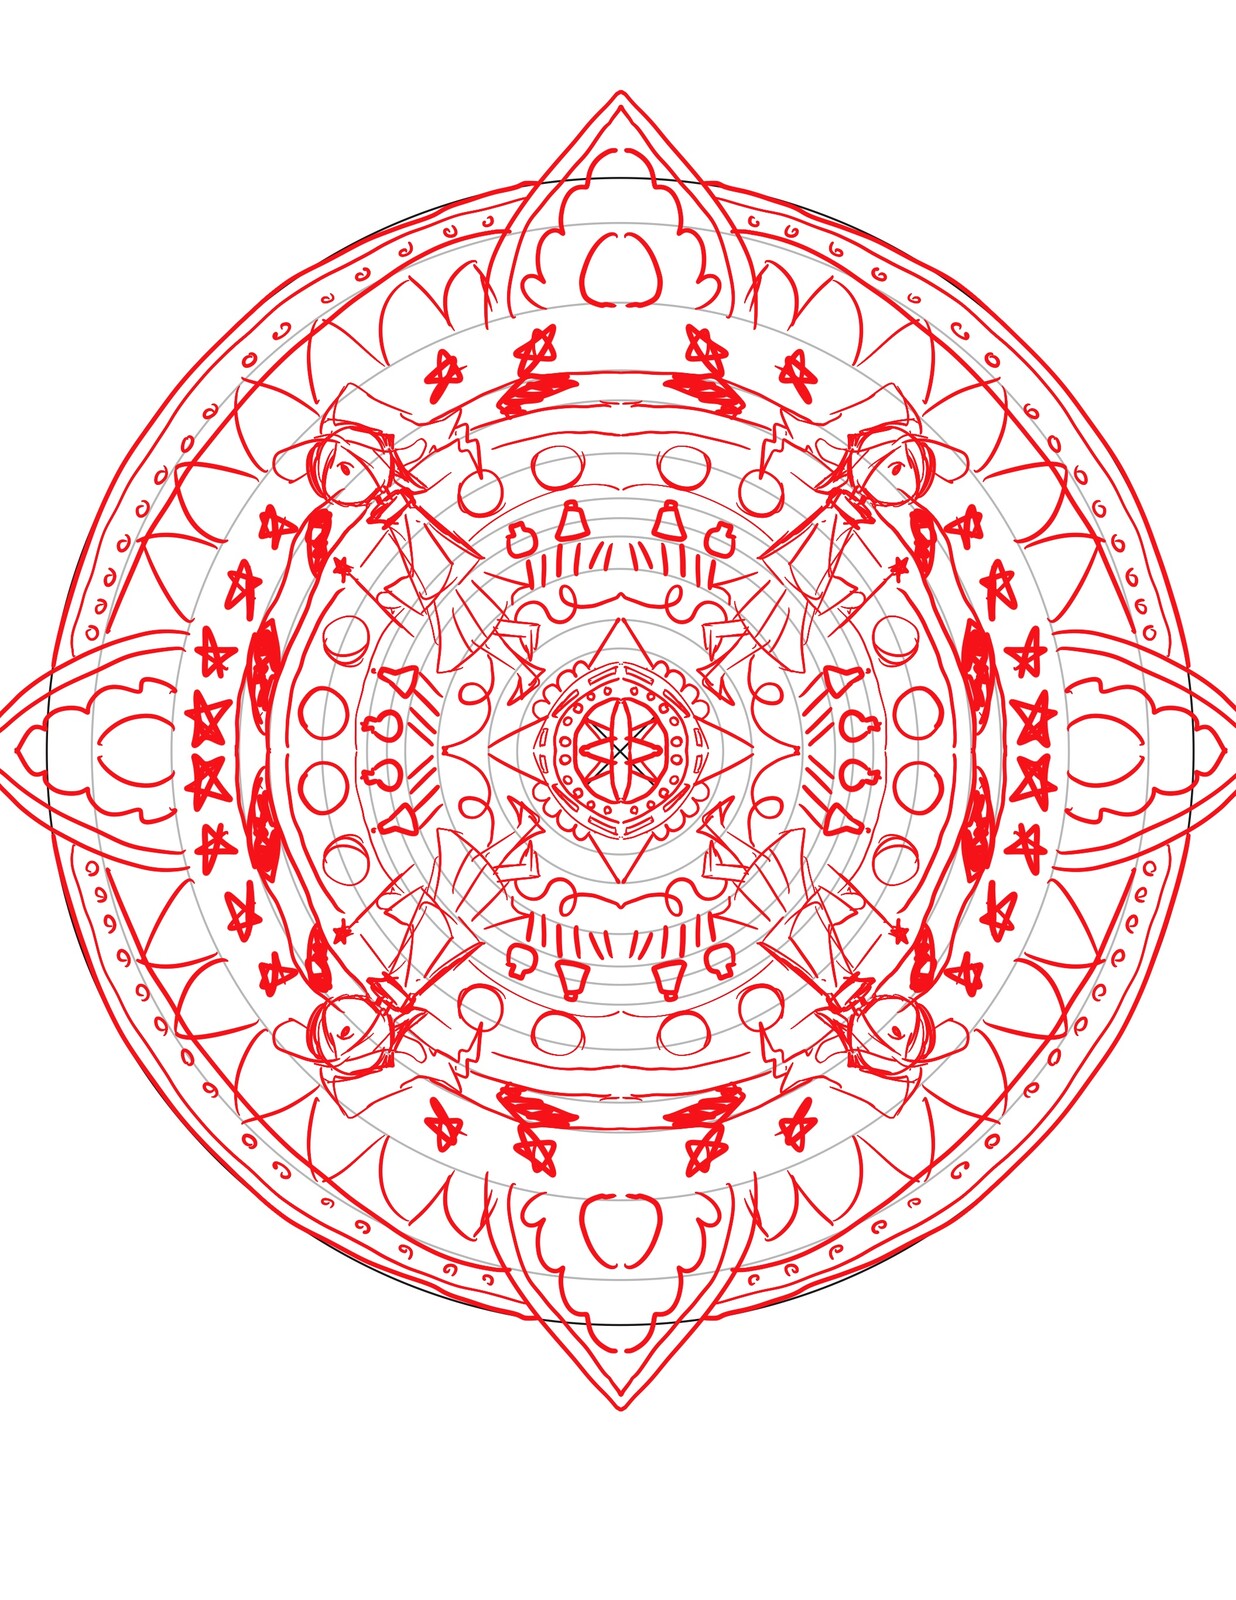 Initial Witch Mandala Concept